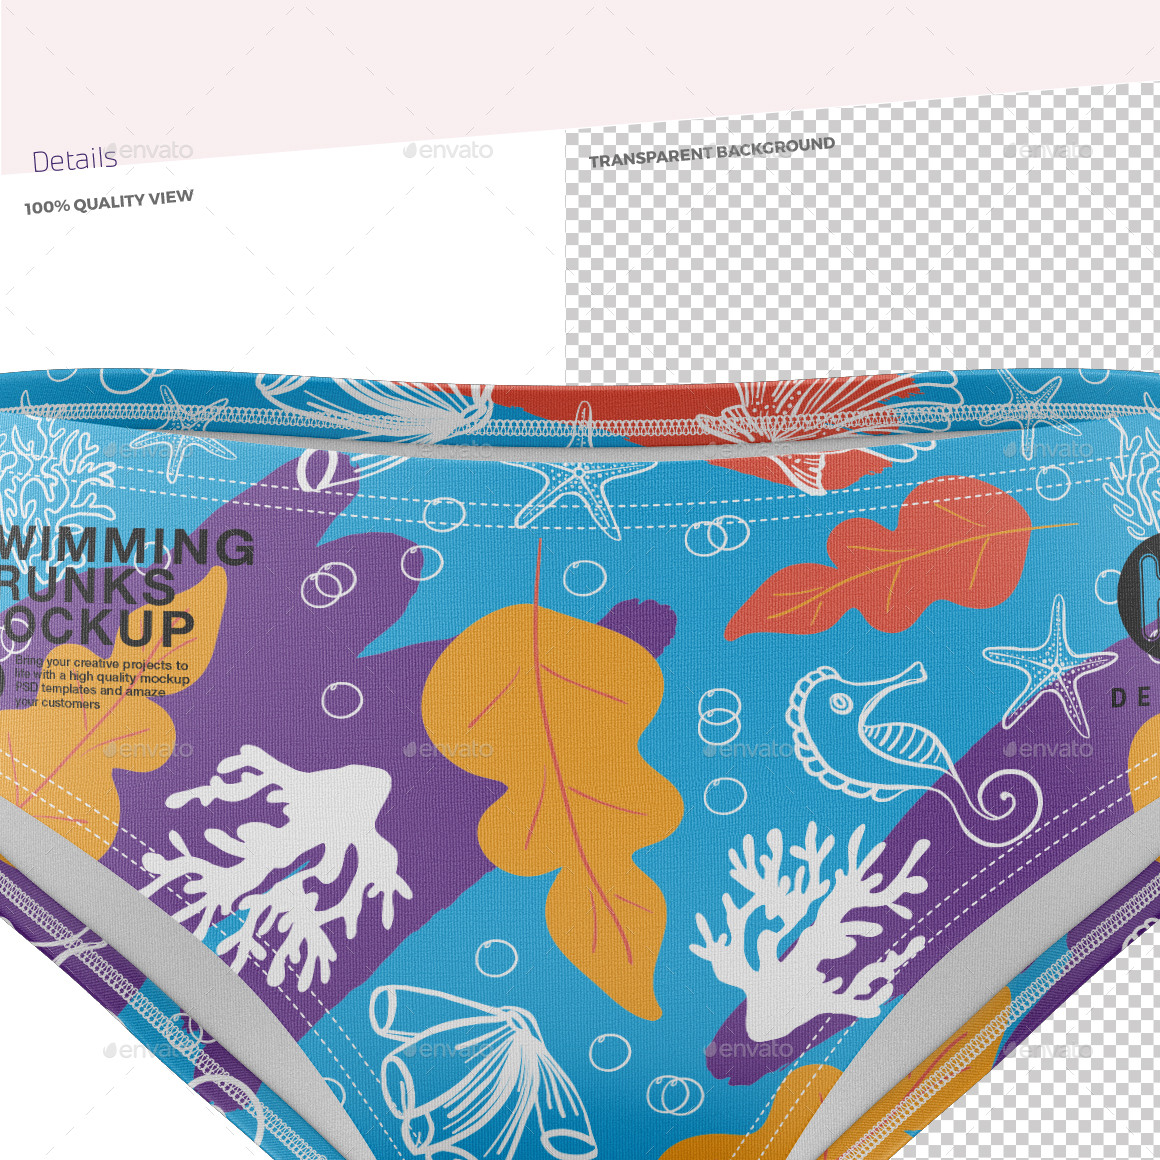 Swimming Trunks Mockup by TRDesignme | GraphicRiver